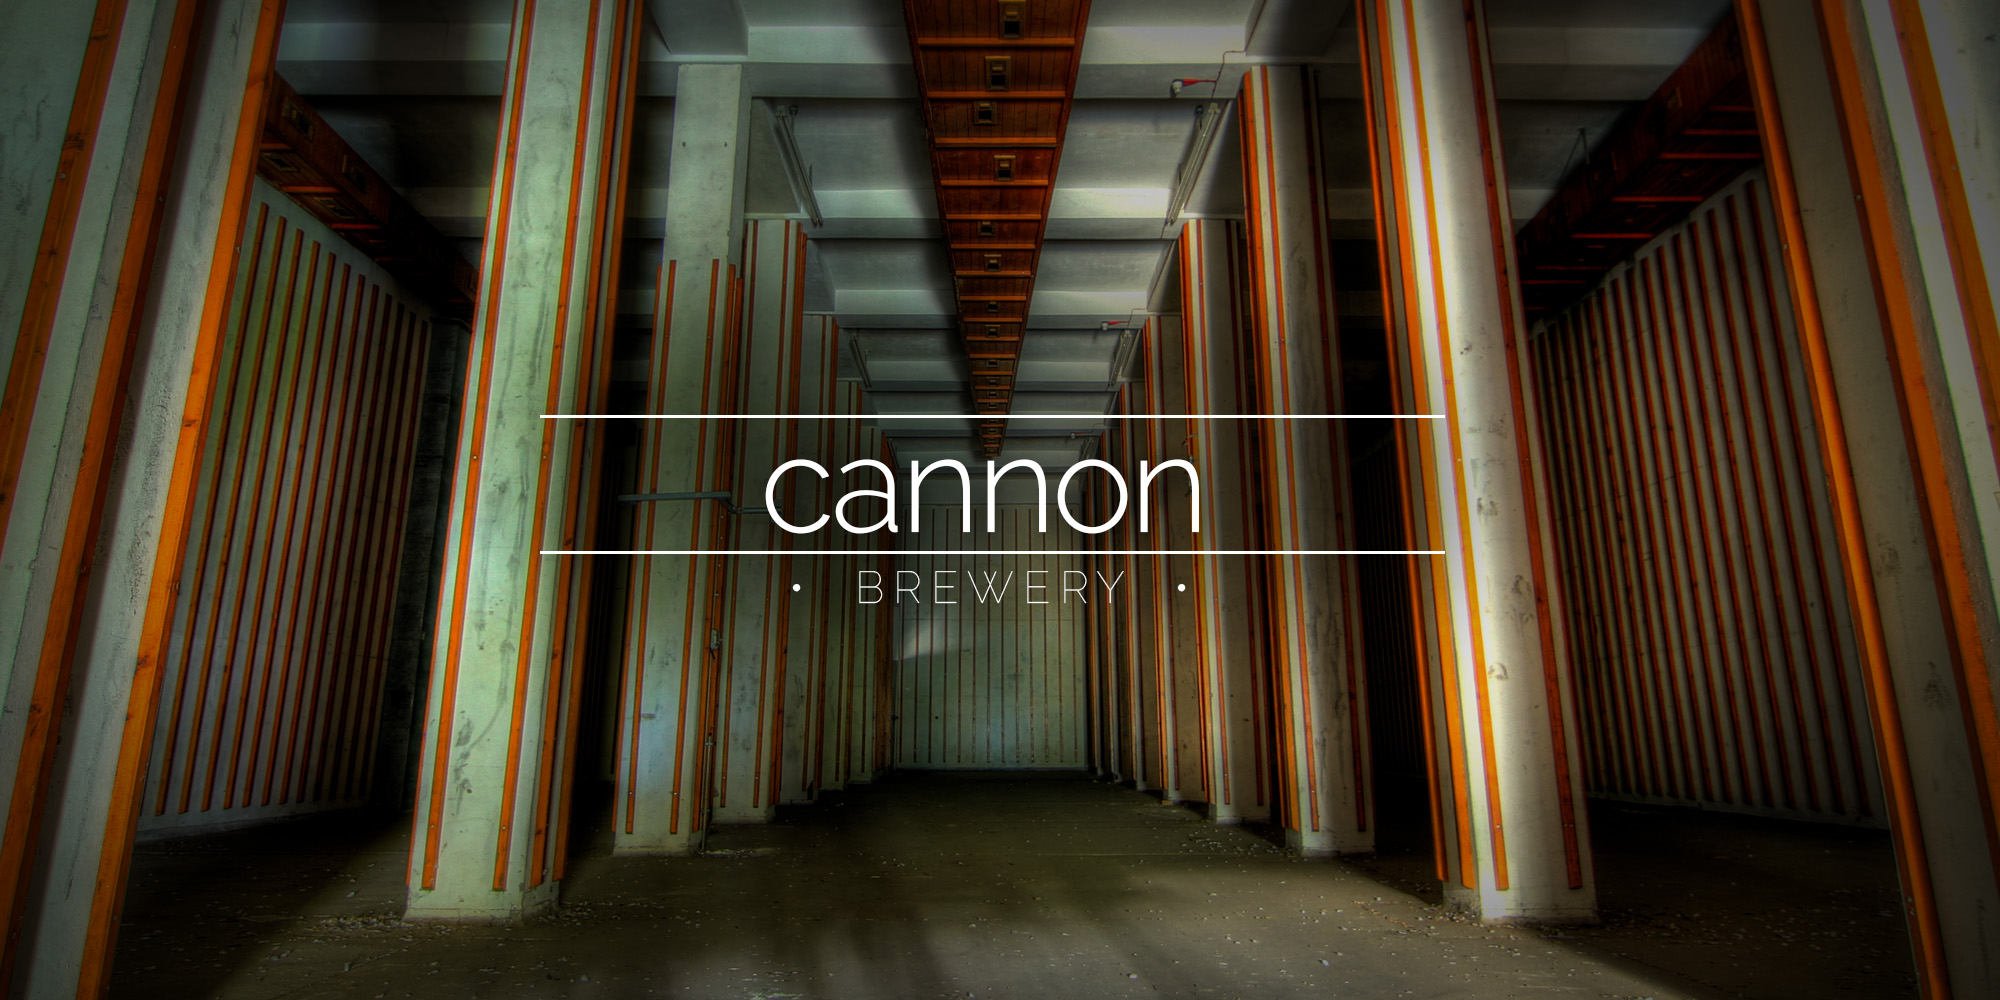 Stones’ Cannon Brewery, Sheffield